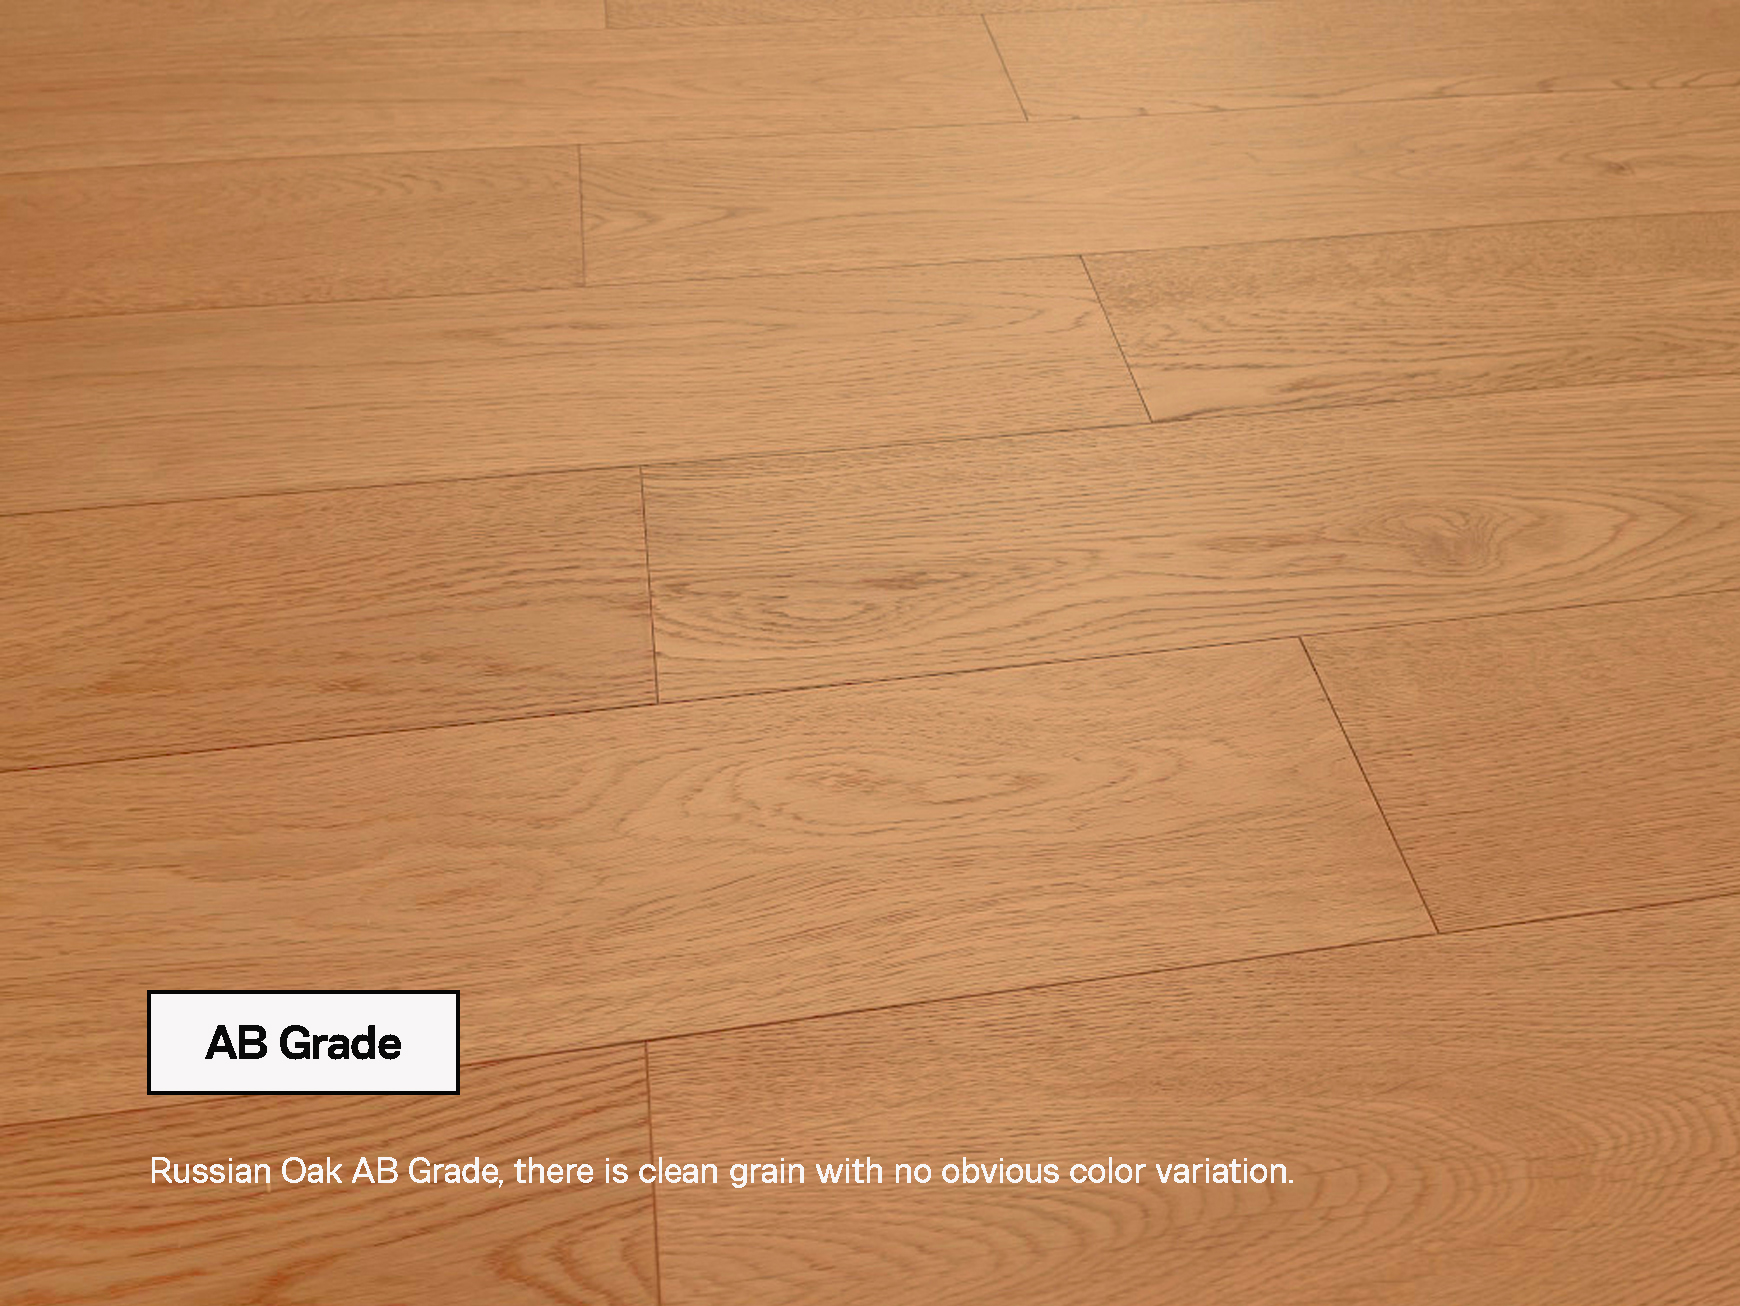 Russian Oak AB Grade, there is clean grain with no obvious color variation. 